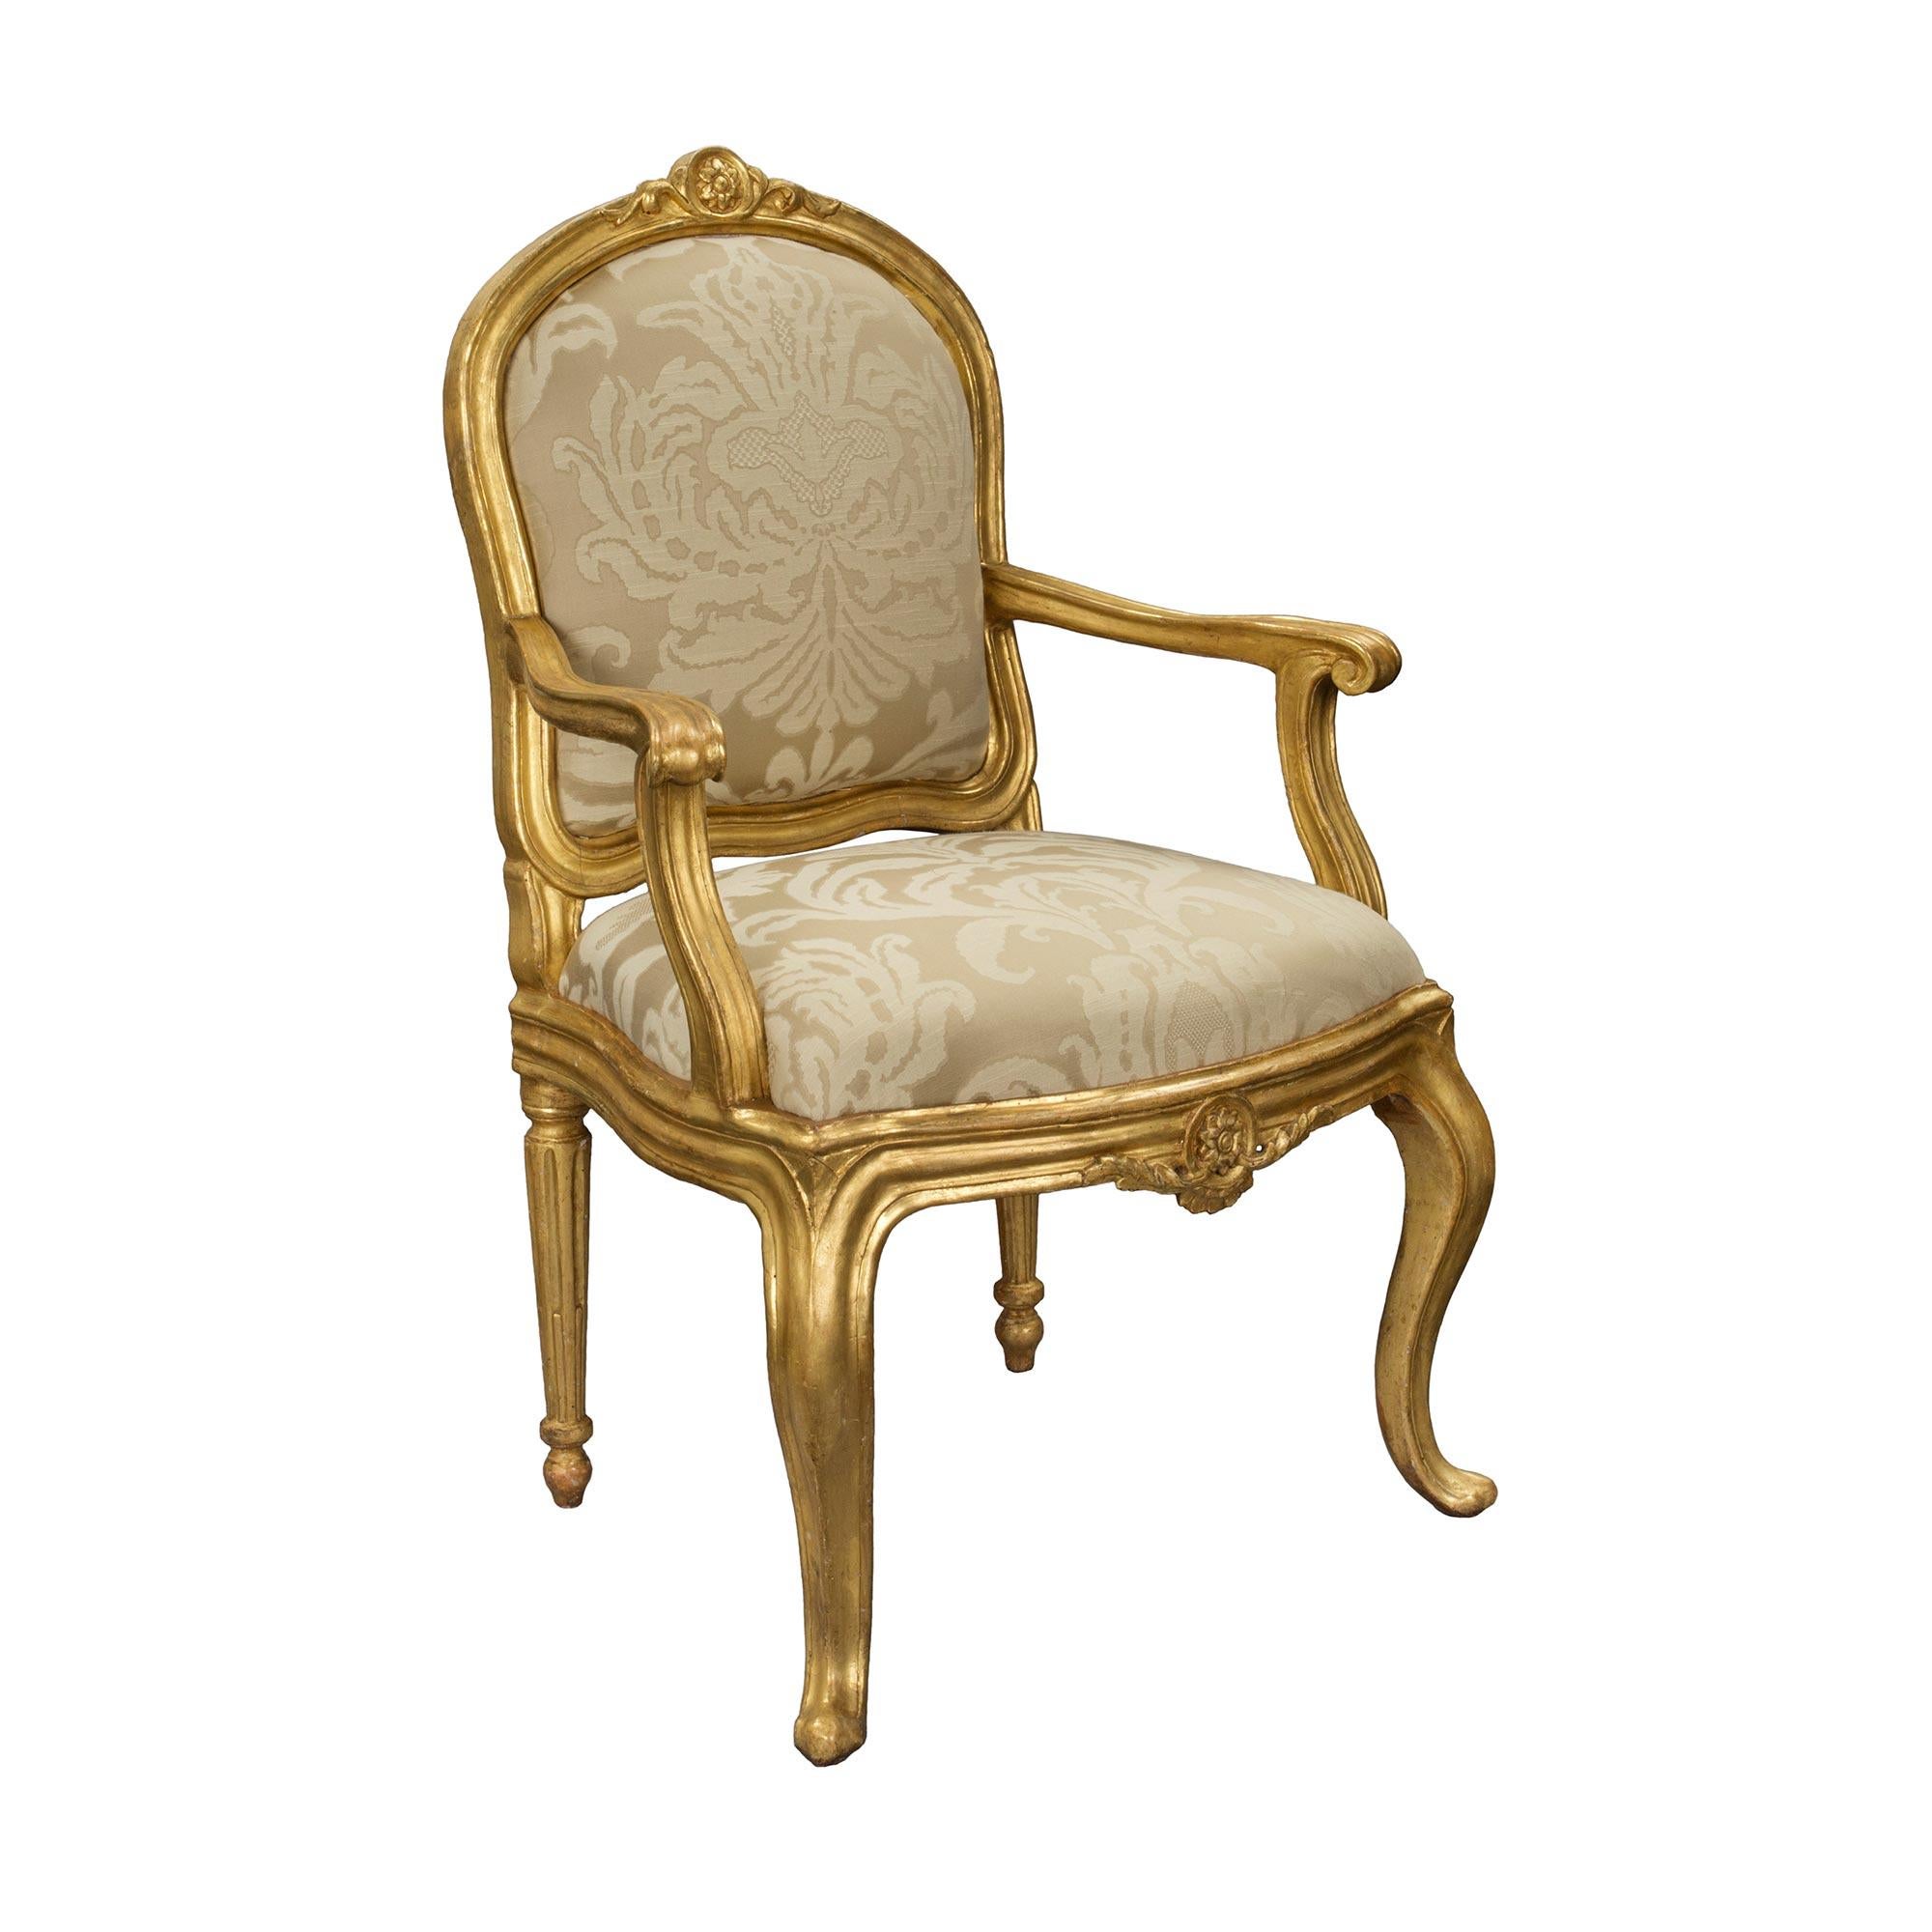 A striking and most unique complete set of four Italian 18th century Transitional Period giltwood armchairs. Each armchair is raised by superb cabriole legs at the front and elegant circular tapered fluted legs to the rear. The frieze displays an